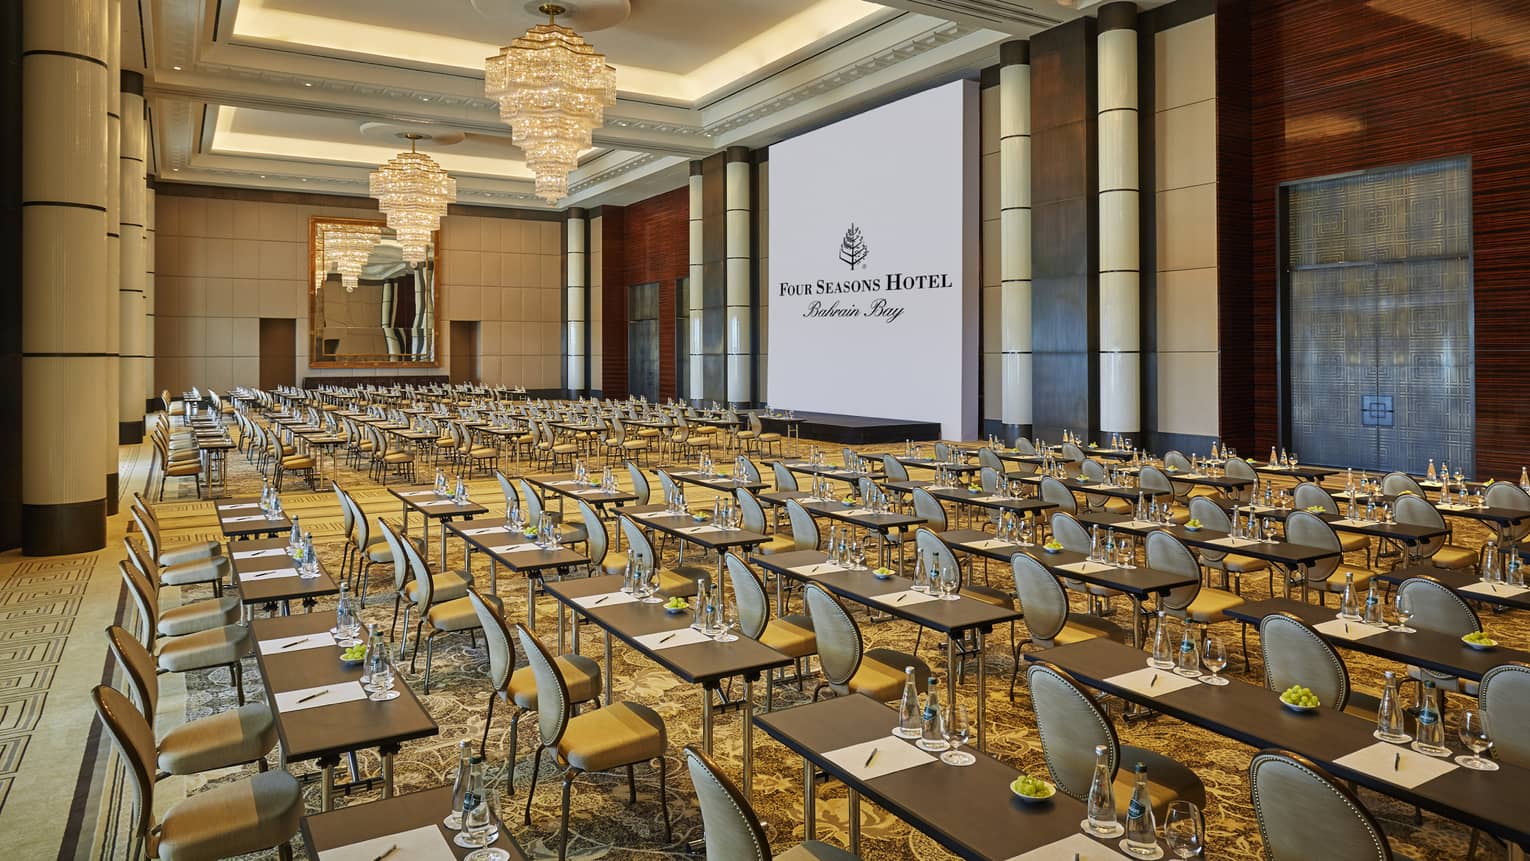 Conference in ballroom, rows of meeting tables and chairs facing large screen with Four Seasons Hotel logo